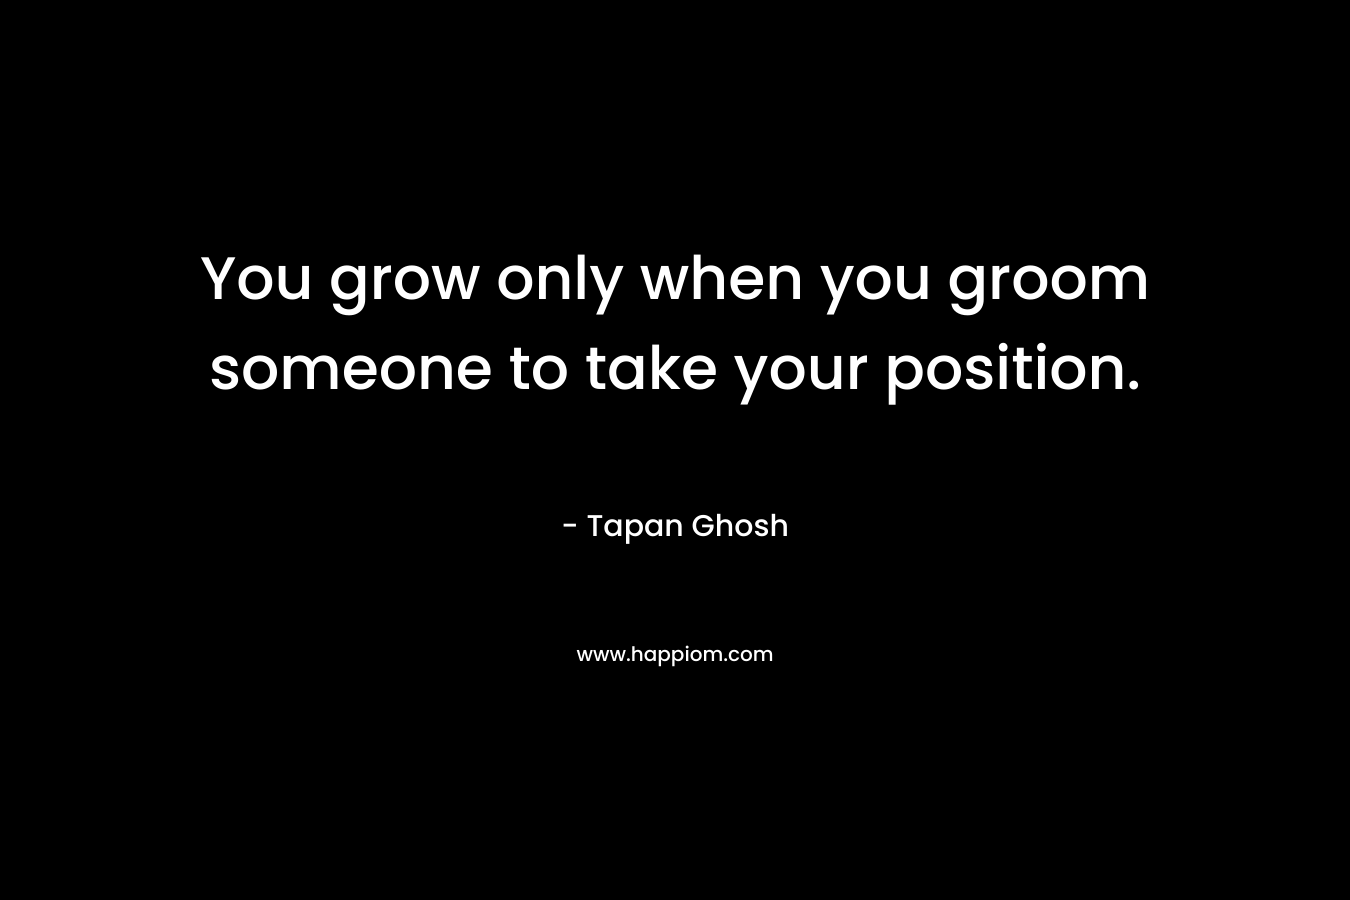 You grow only when you groom someone to take your position. – Tapan Ghosh